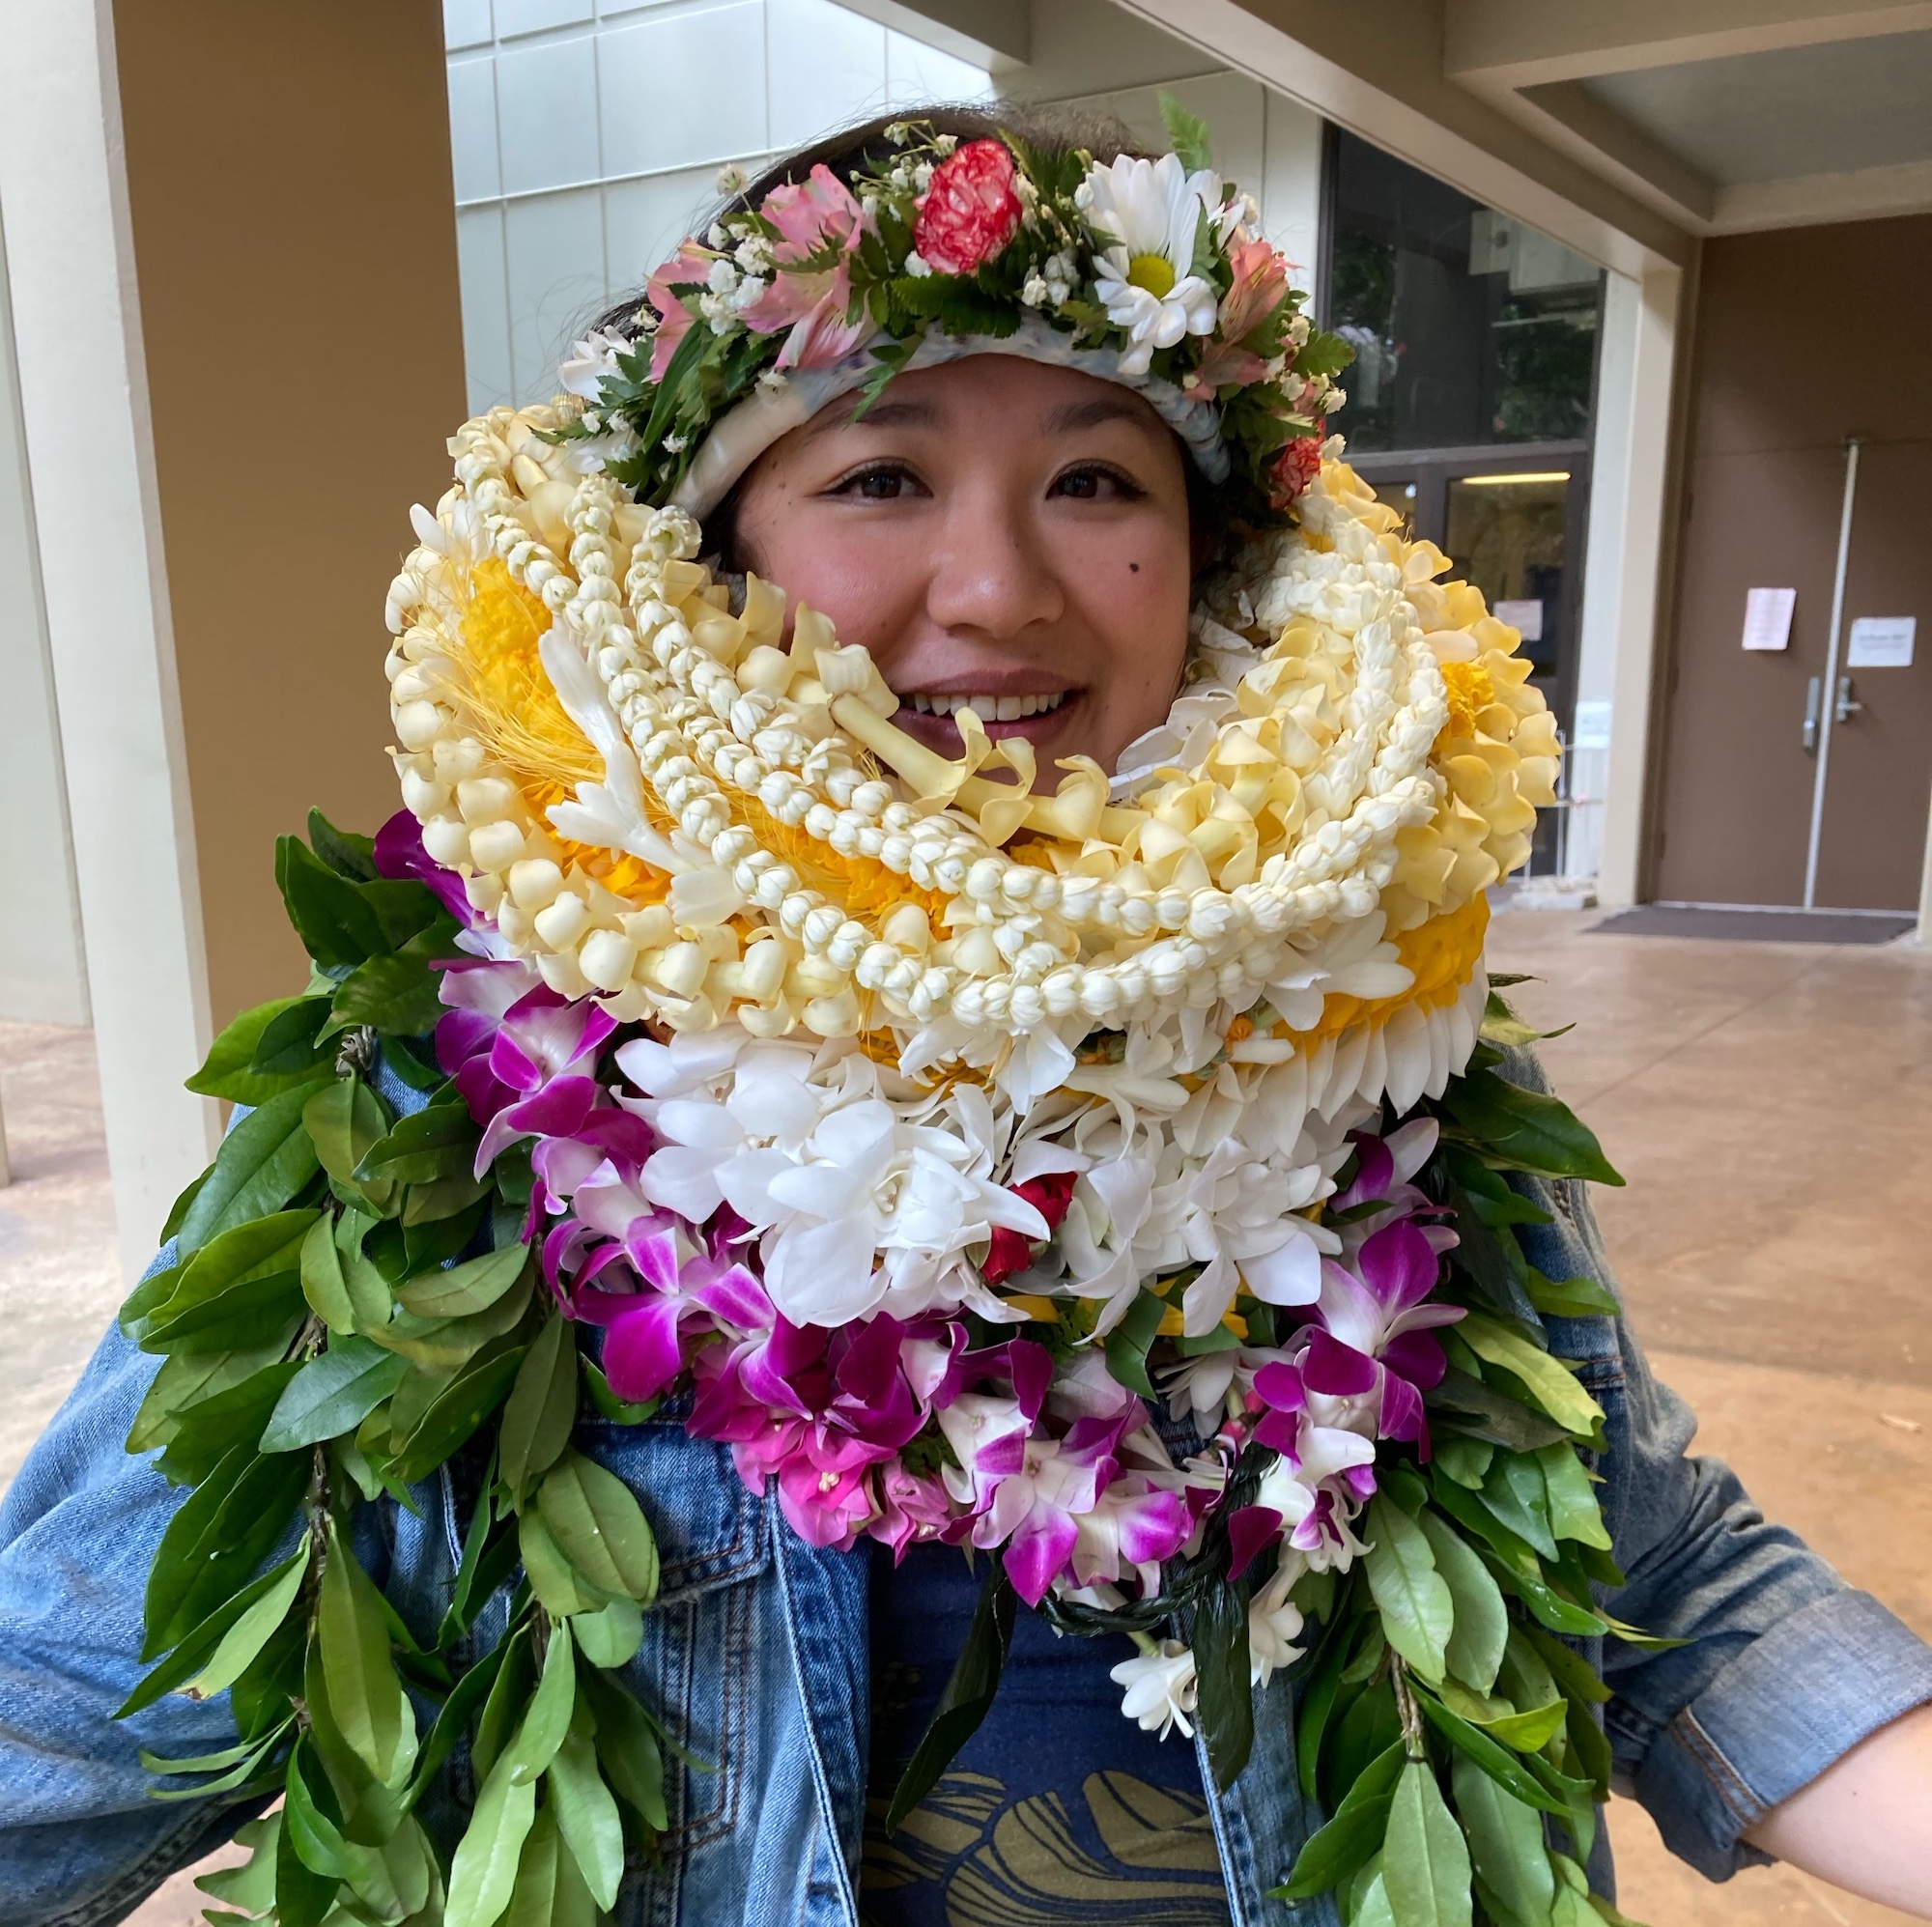 Diamond Tachera with many lei after defending her dissertation